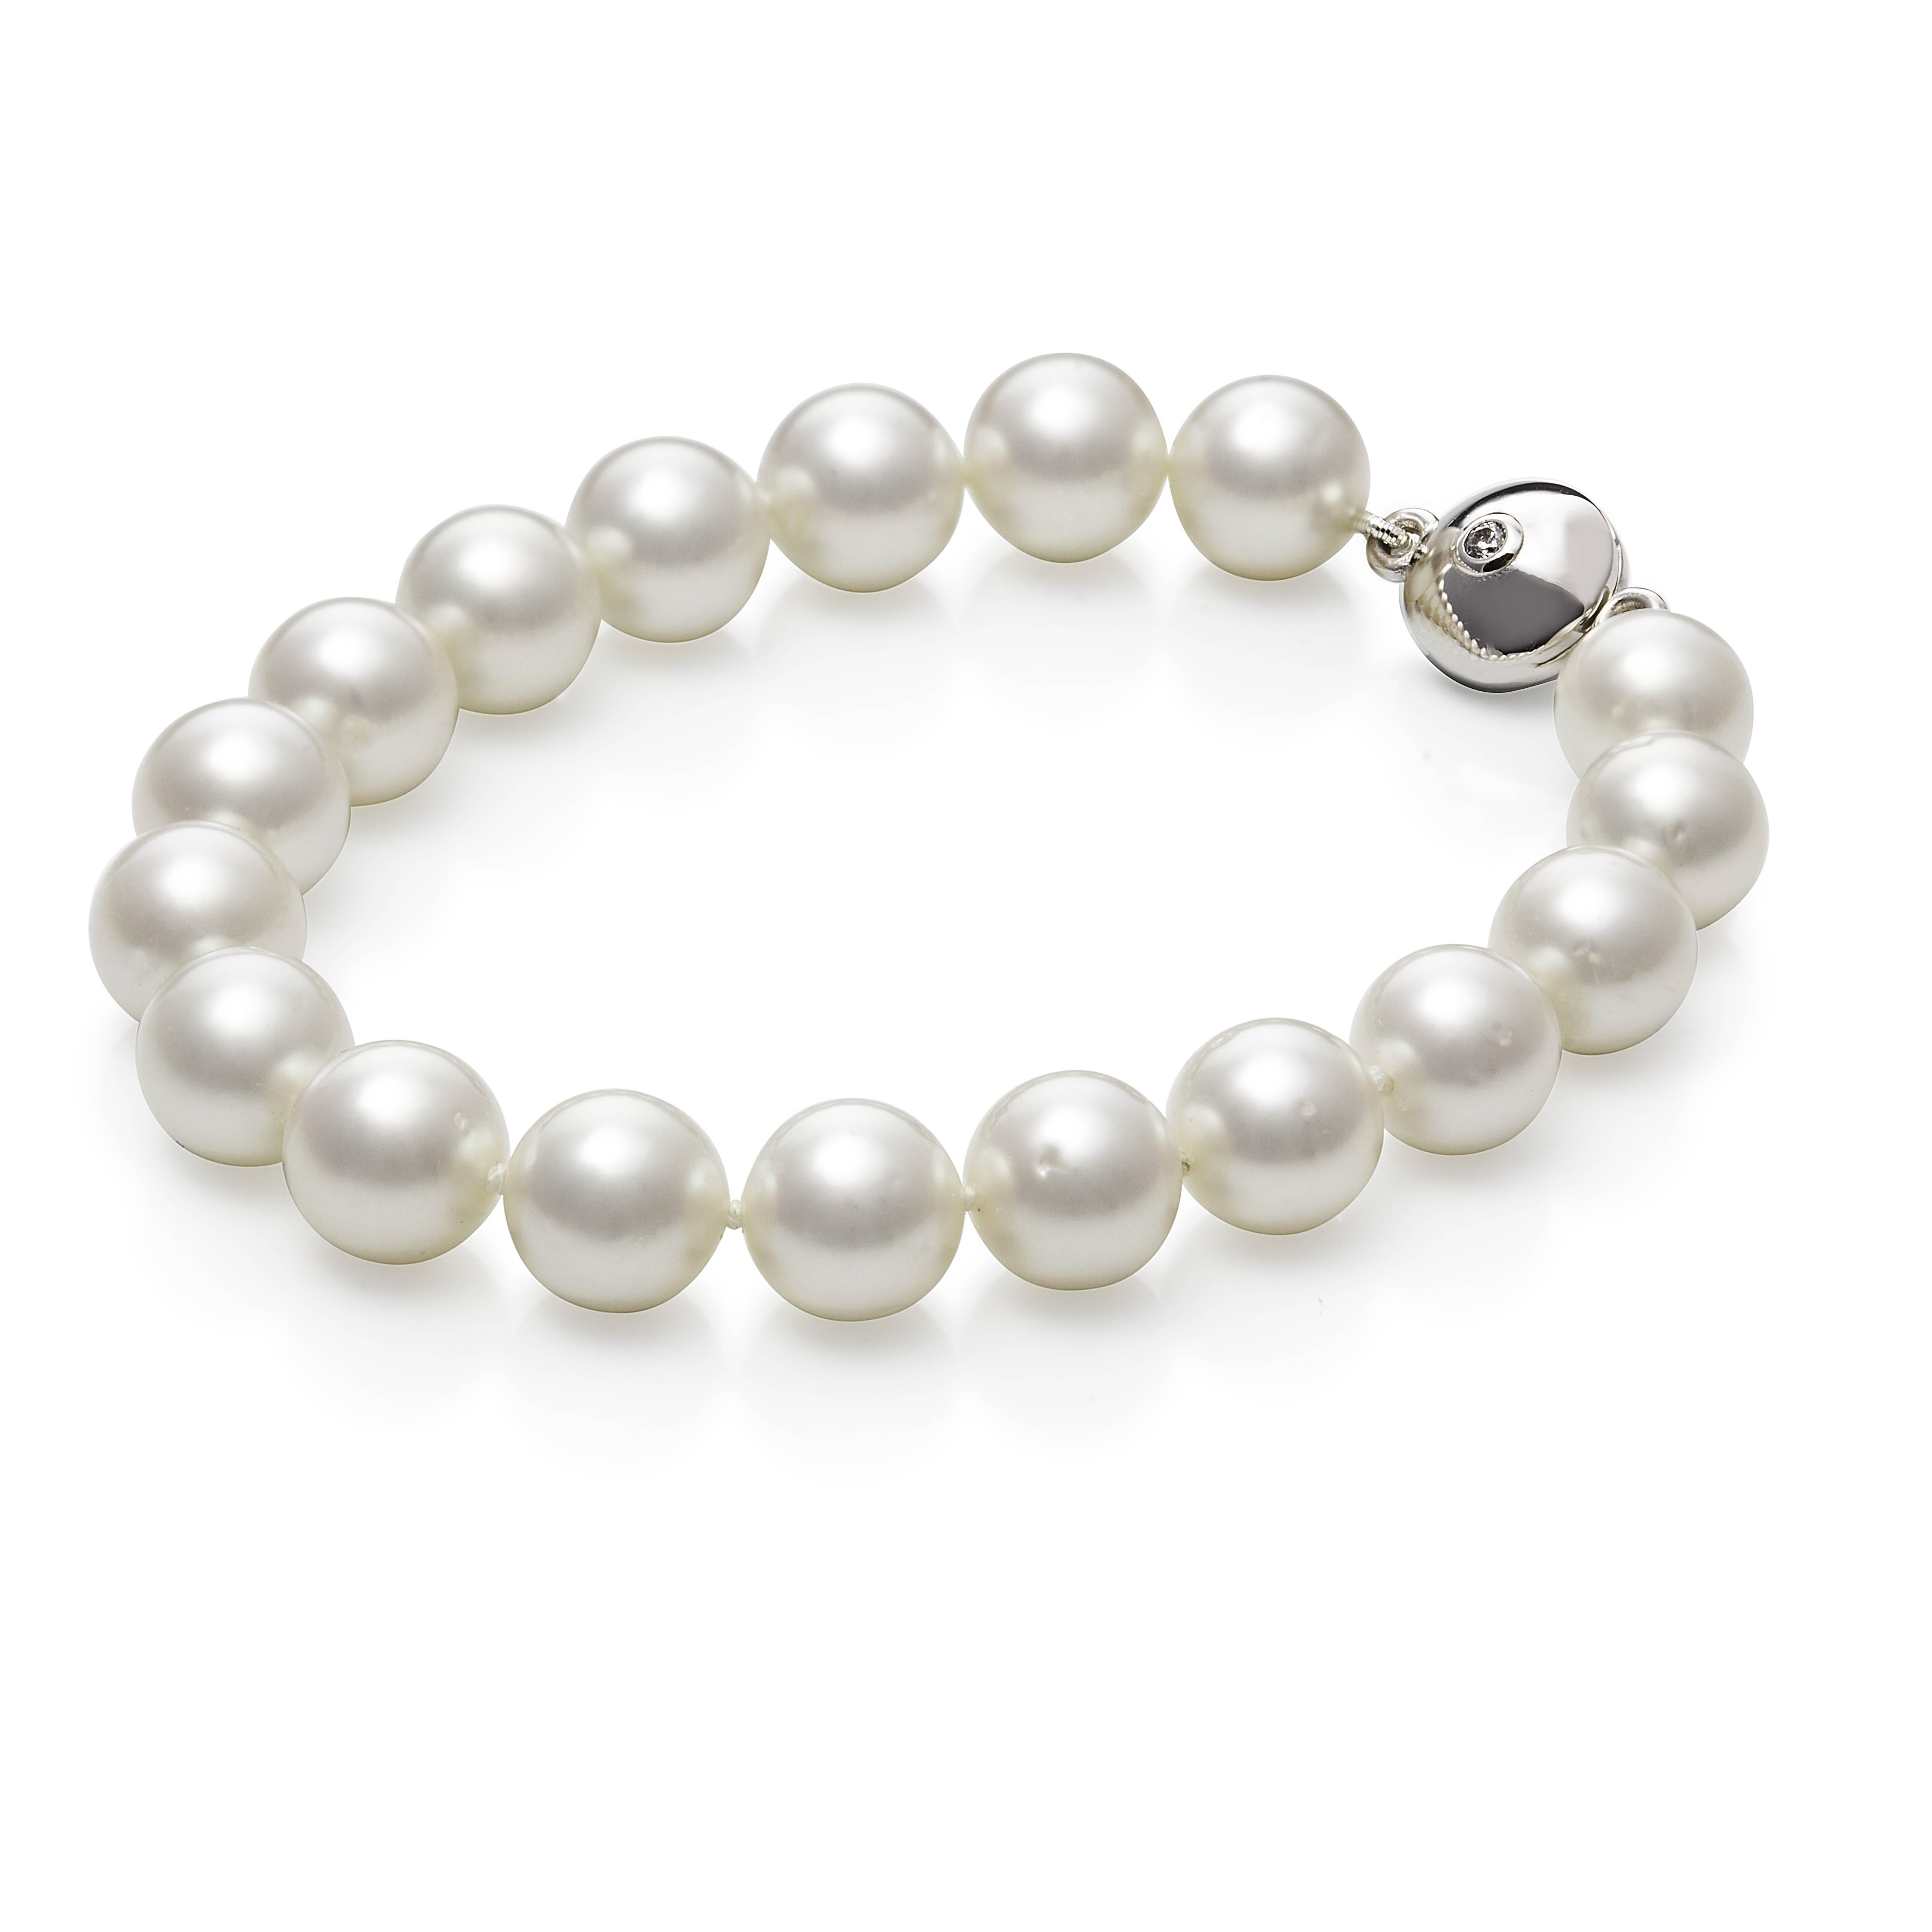 Australian South Sea pearl bracelet of 9-10mm near round, white, grade 3 pearls.  (some of the pearls will have fine marks on them which is reflected in the price).  The pearls have a fine nacre which is shown off with the high lustre.  colour is